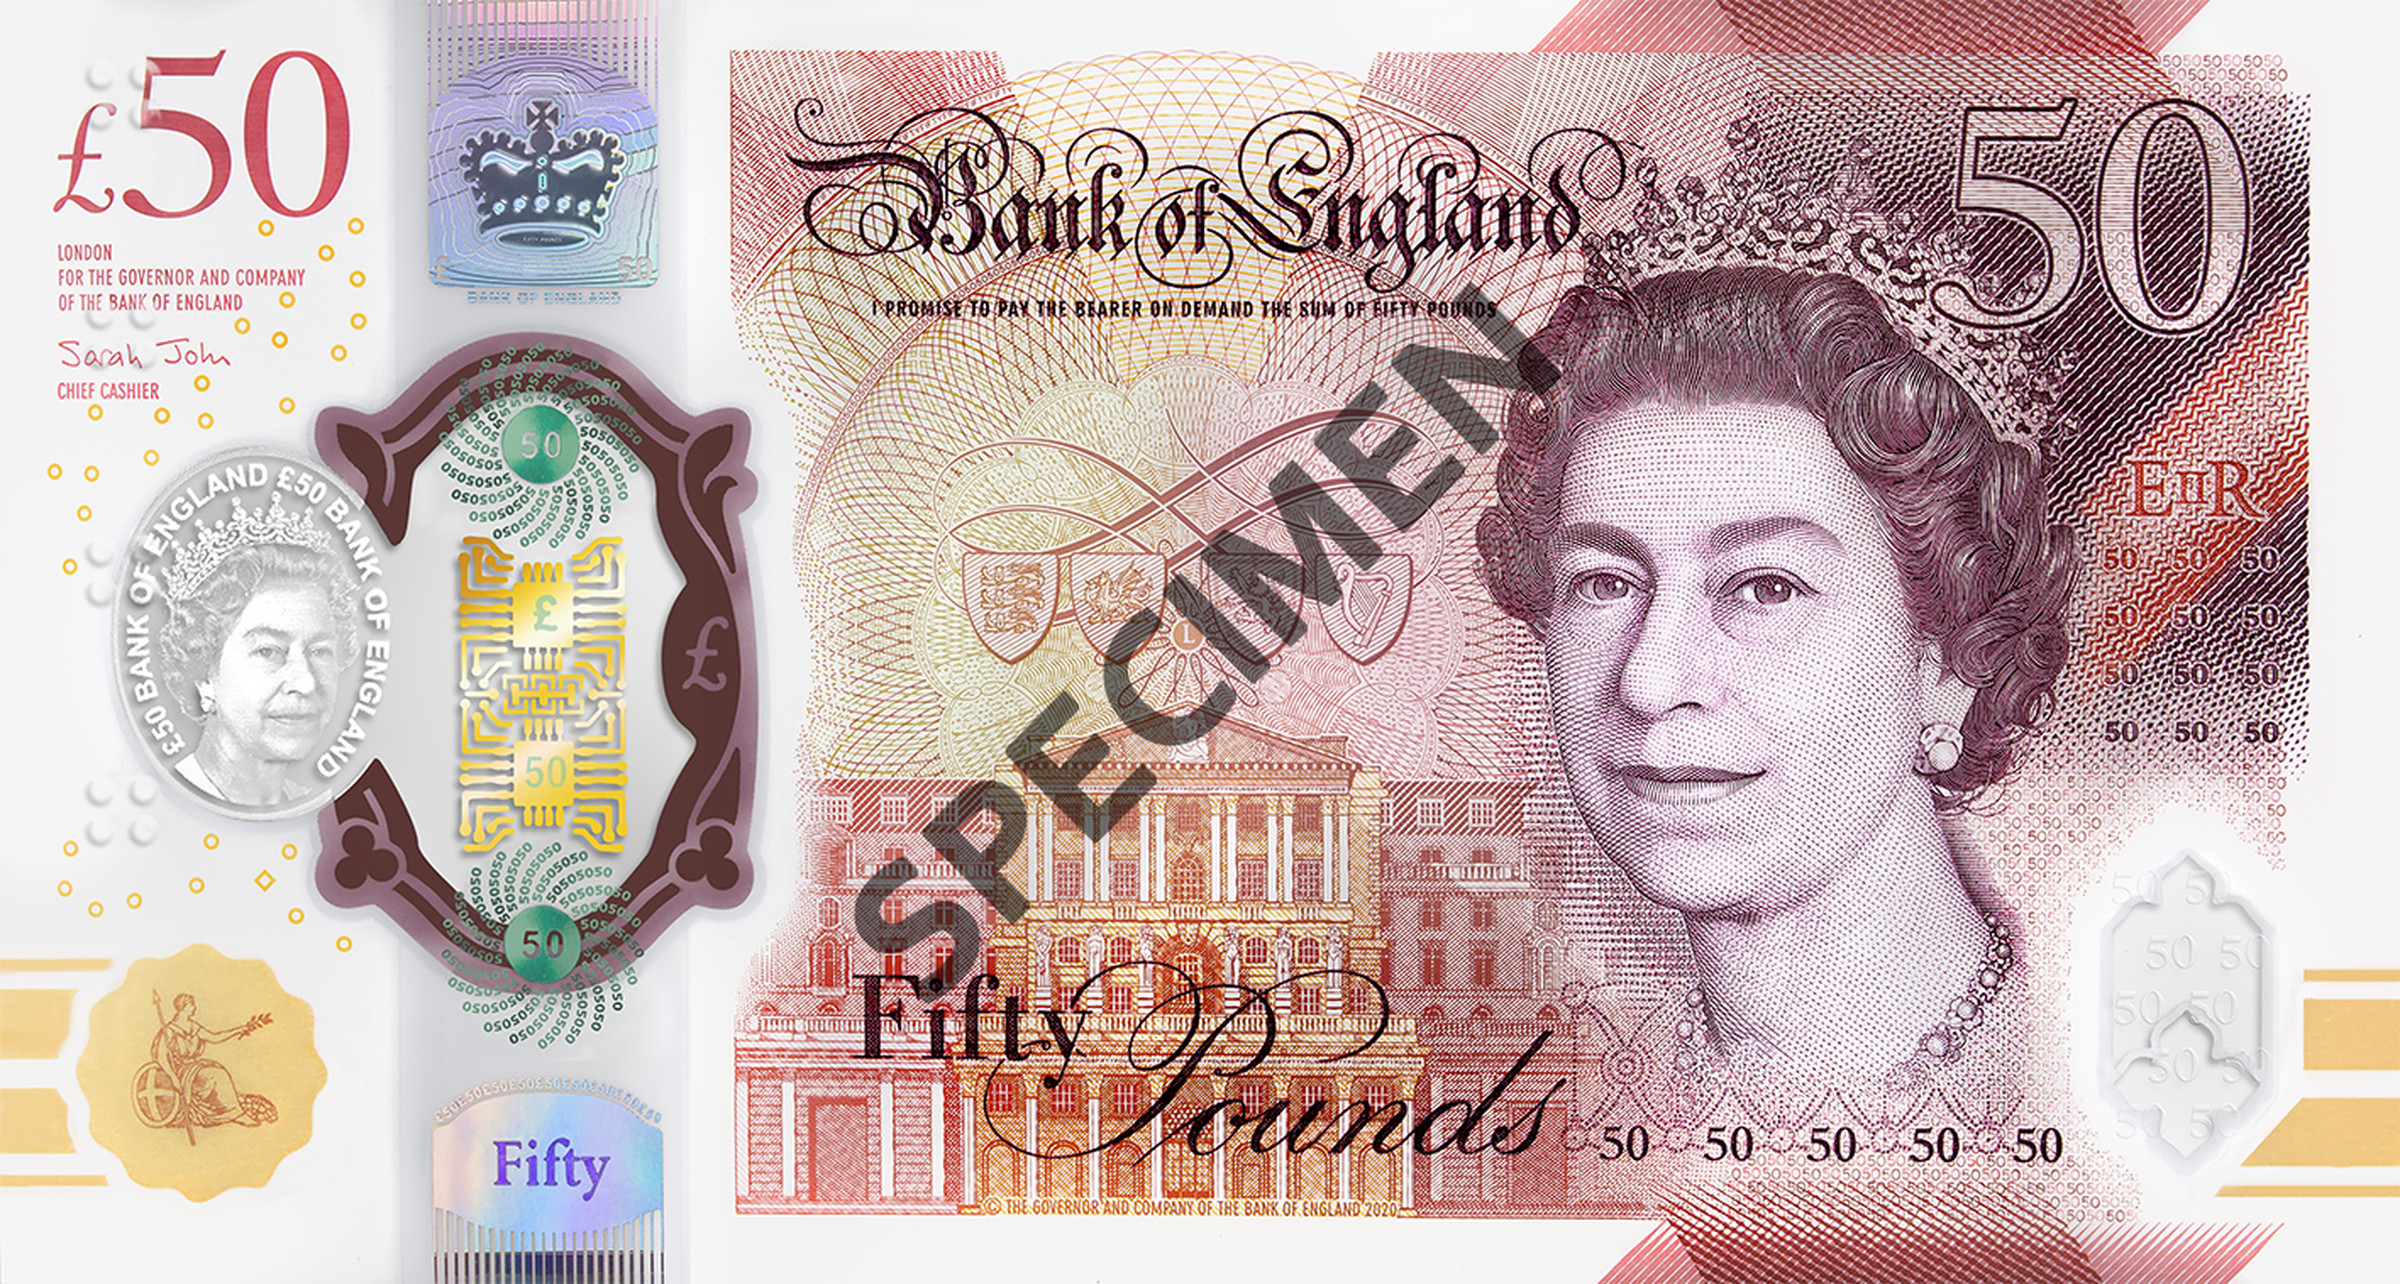 The rear of the note features standard elements for UK bank notes, including a portrait of Queen Elizabeth II. 